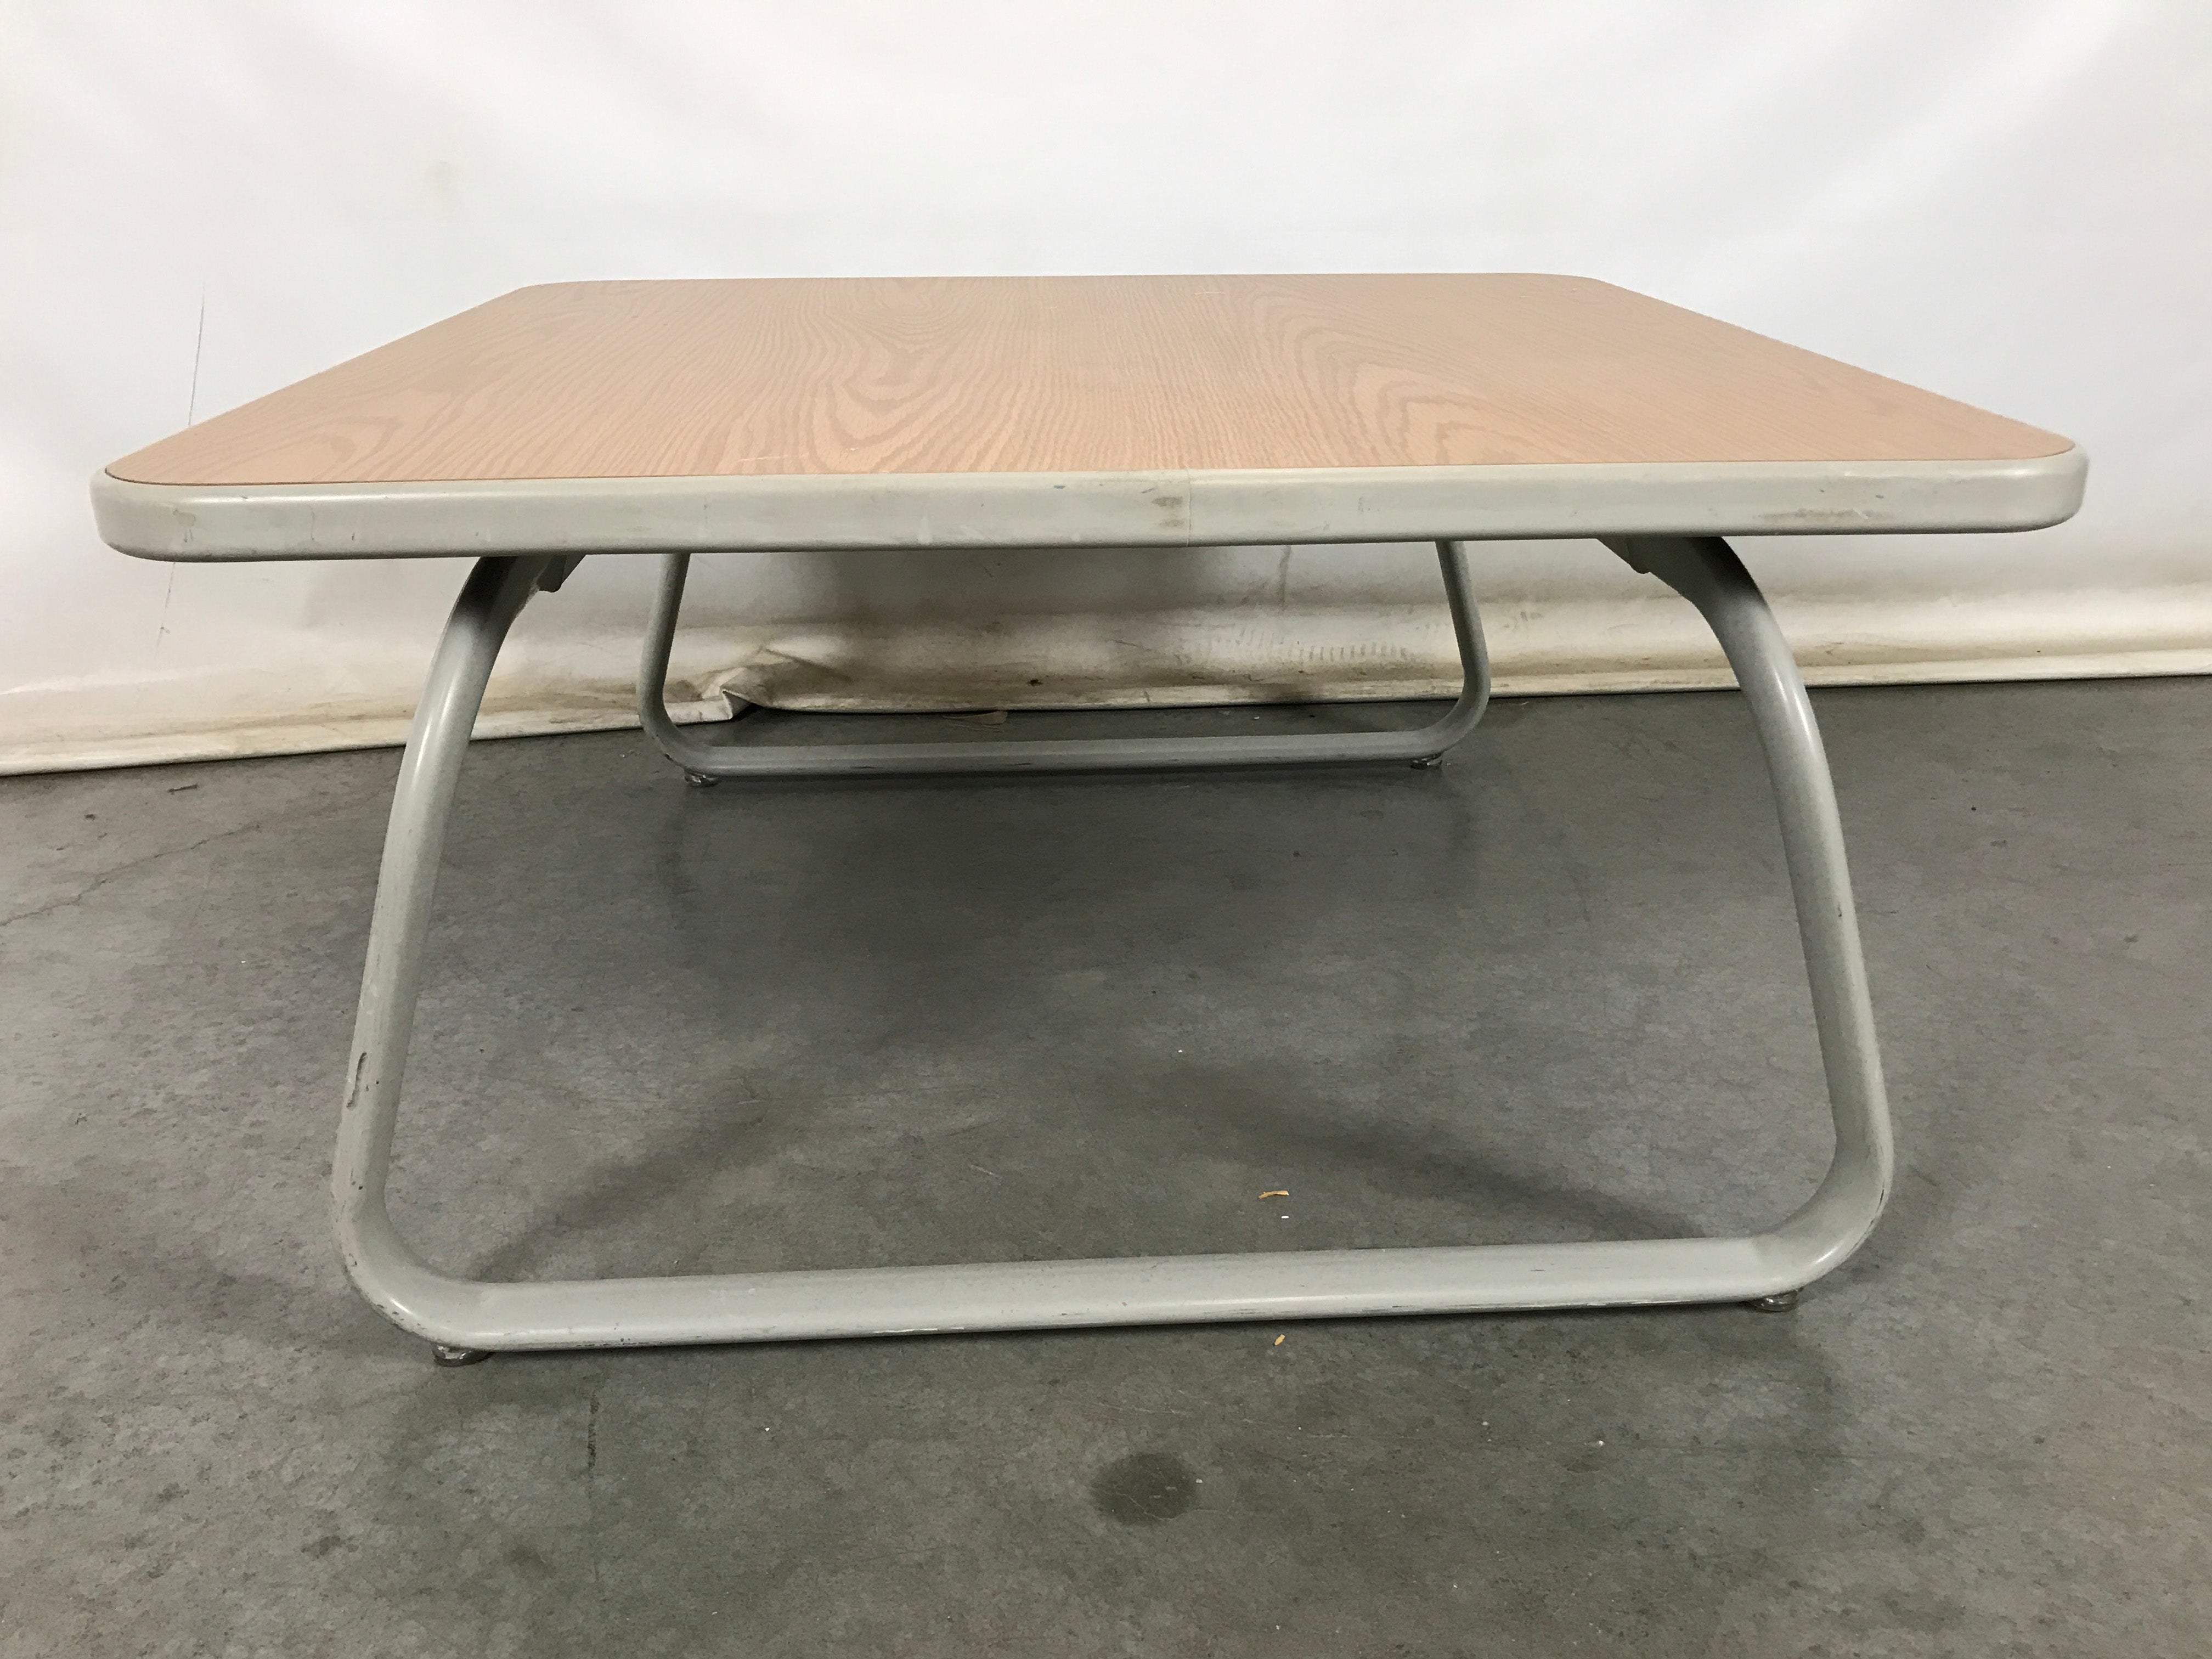 Steelcase Short Square Table